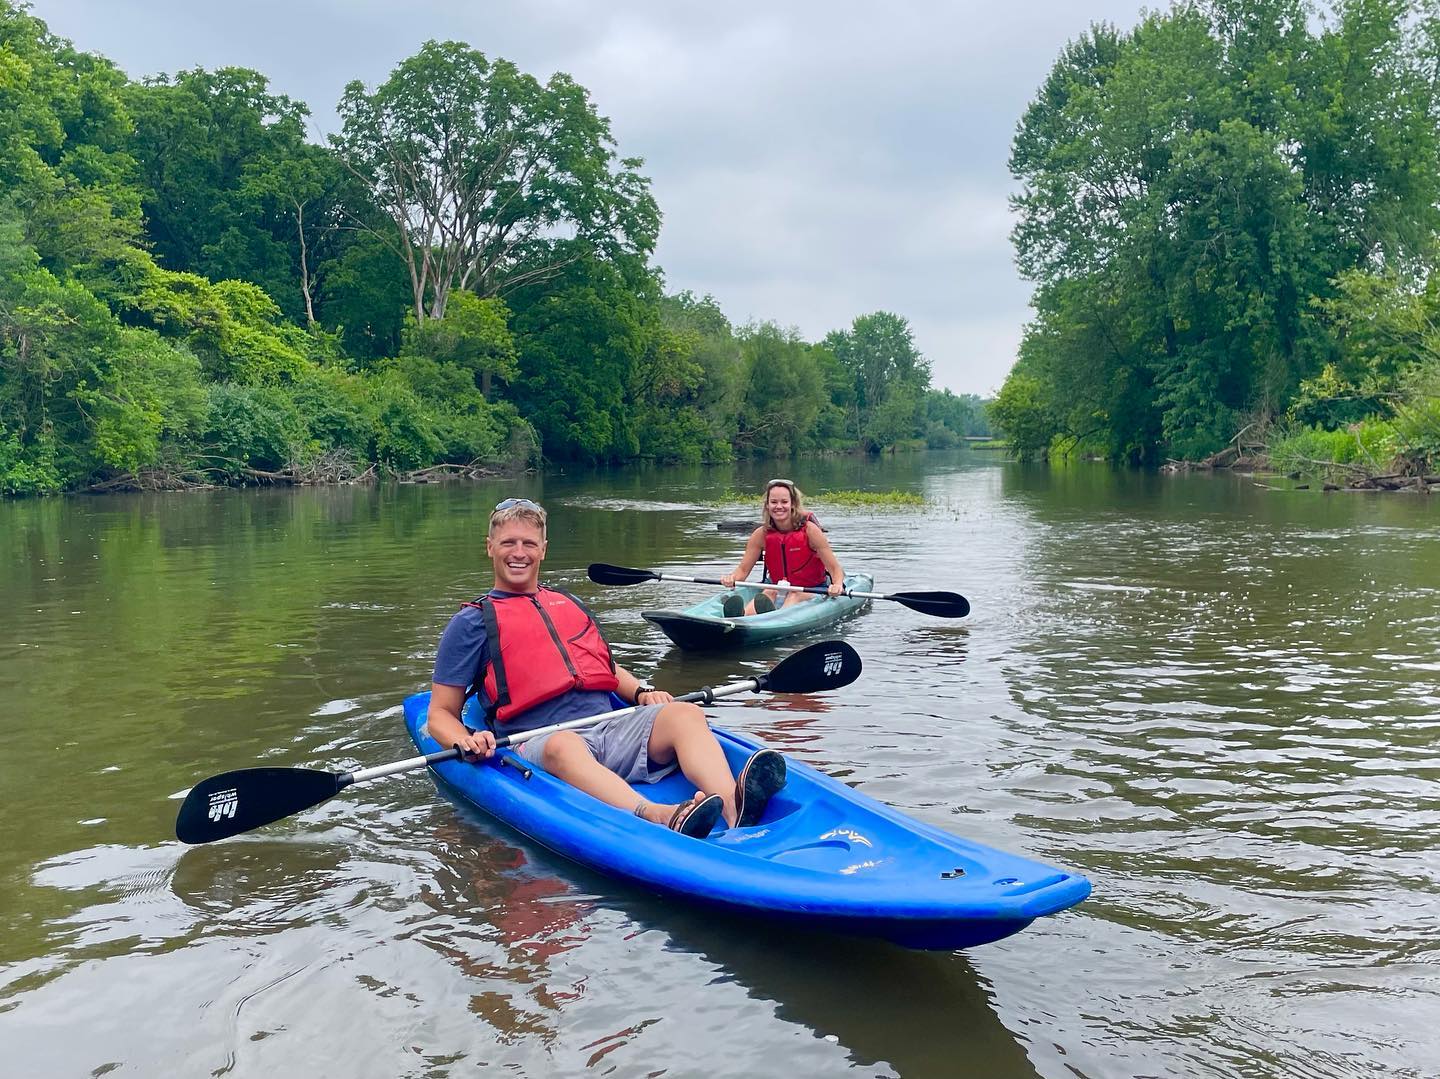 It’s a beautiful weekend on the river! Don’t forget to share your photos with the hashtag #napervillekayak 🛶